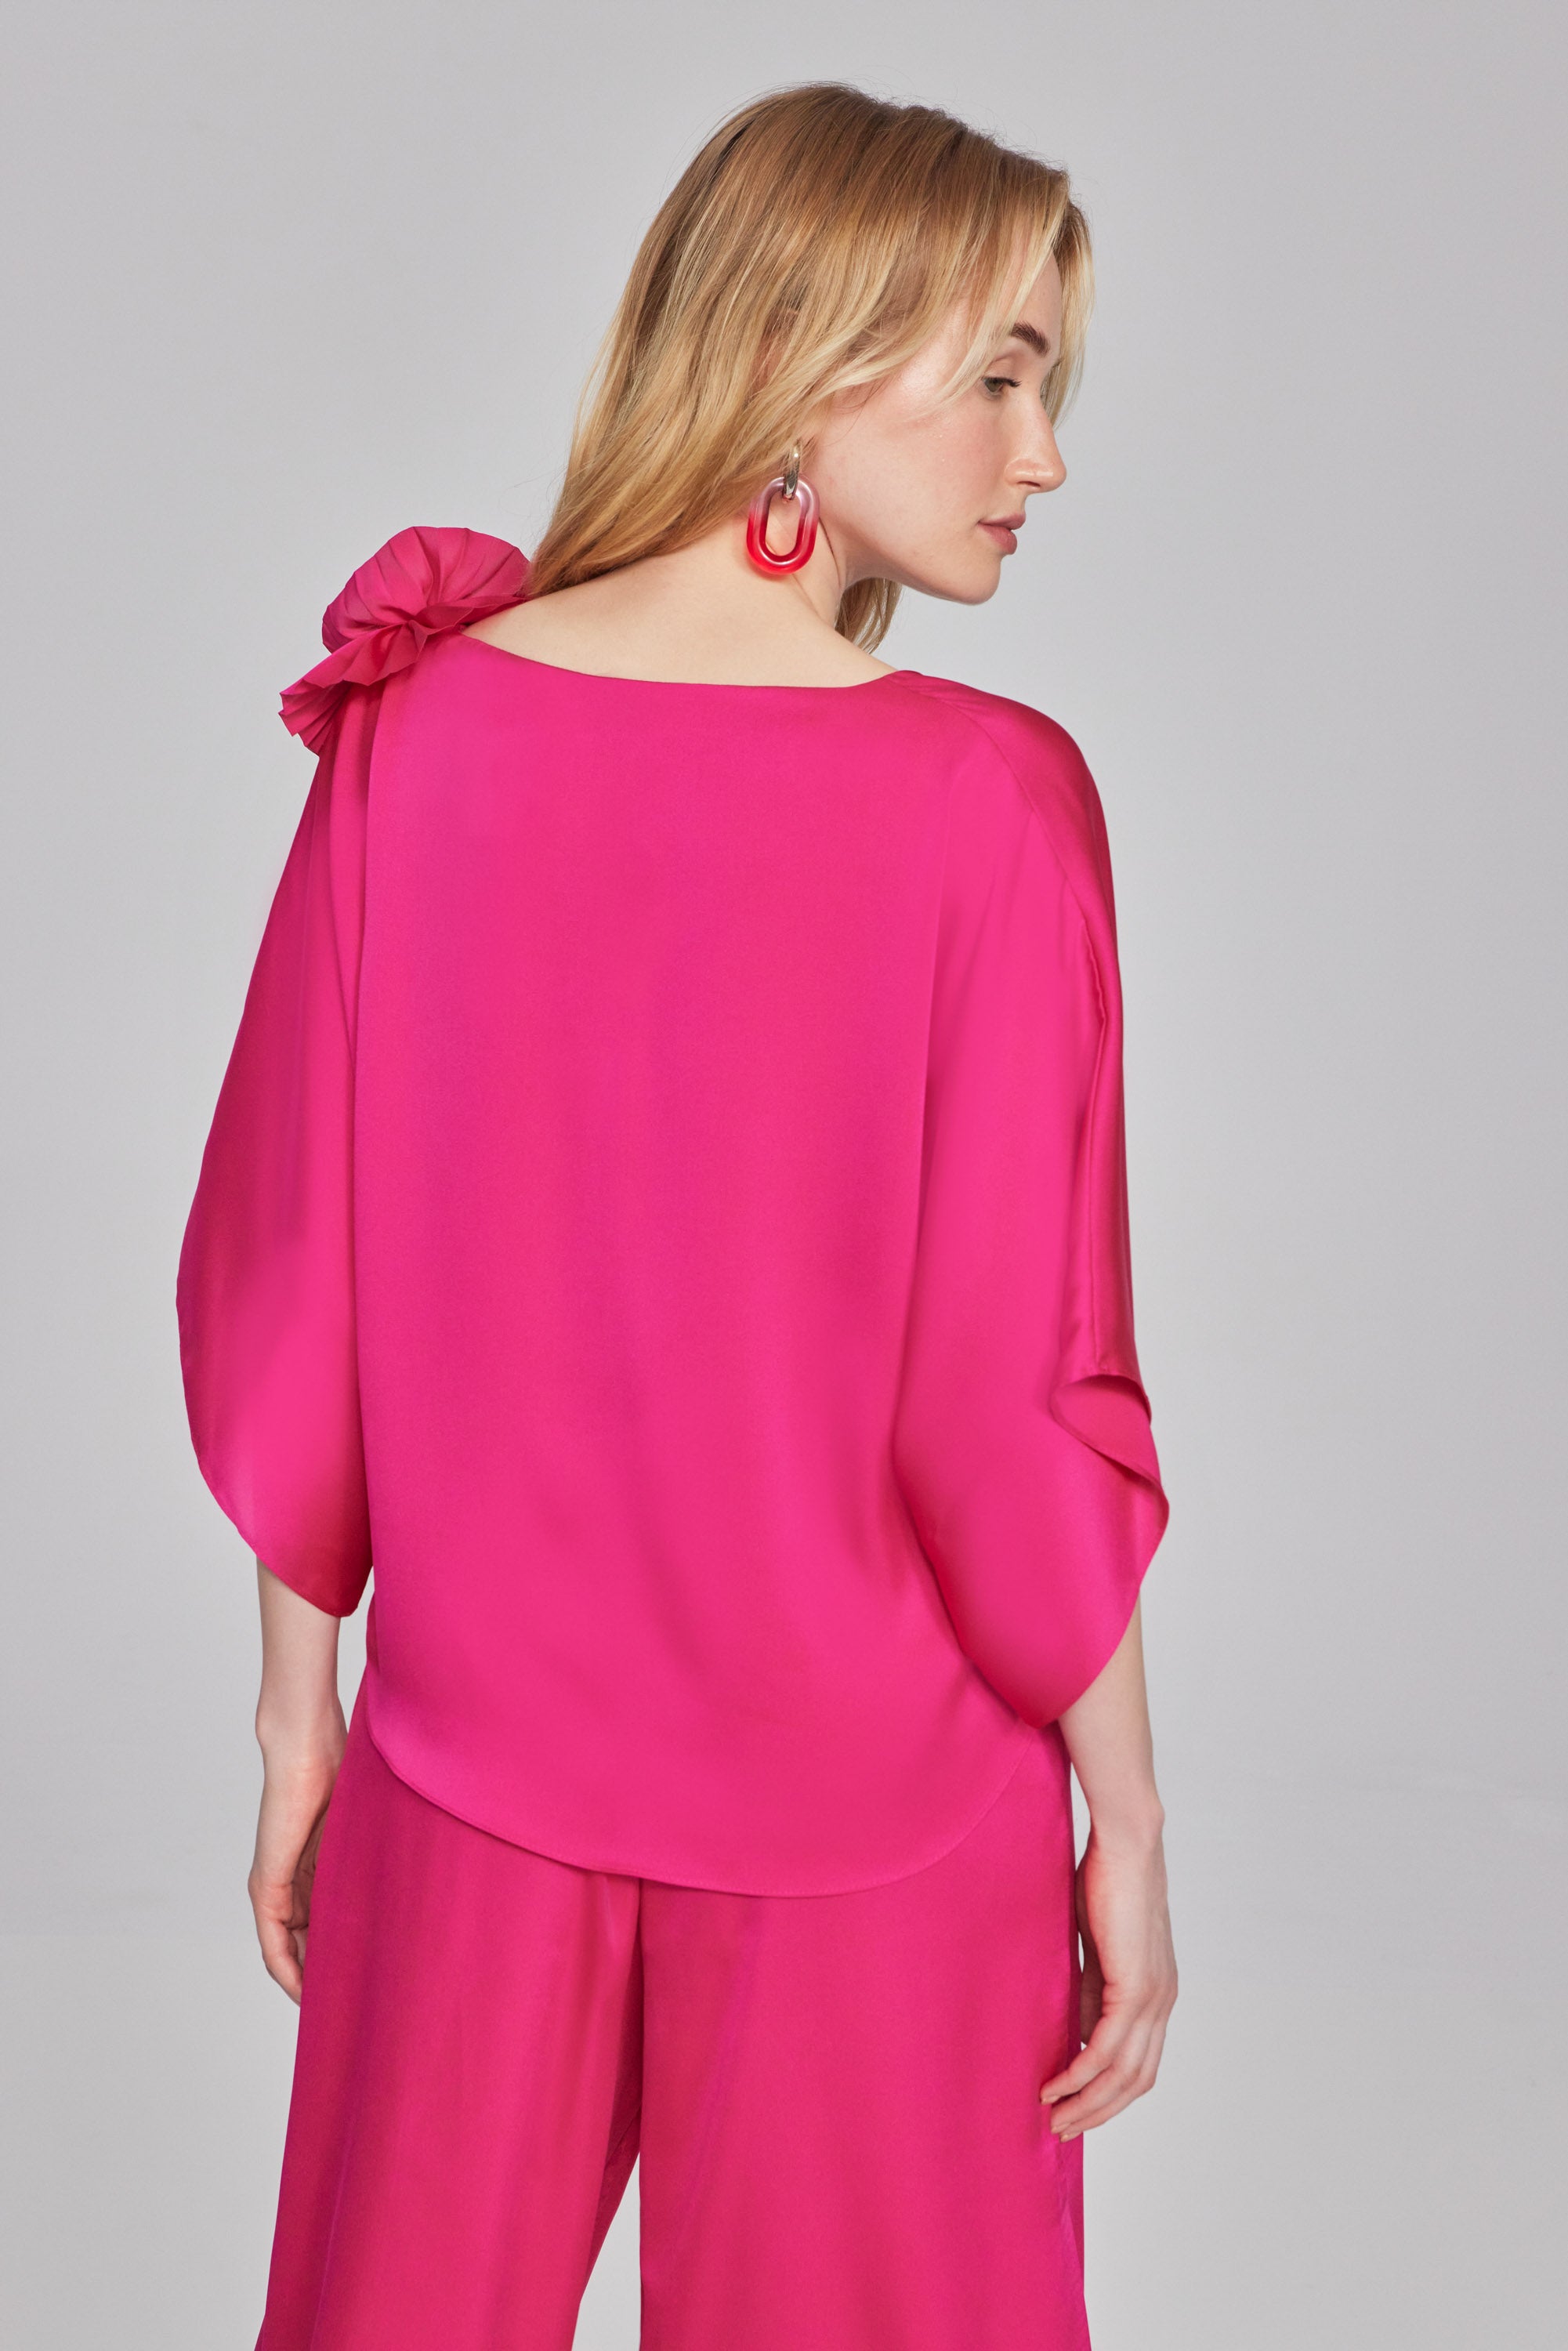 This satin flared top is where elegance meets whimsy. The pleated rosette detail at the shoulder adds a playful and unique touch. The three-quarter dolman sleeves and V-shaped neckline add to its allure, making it a standout piece in your wardrobe. Part of the Signature Collection.